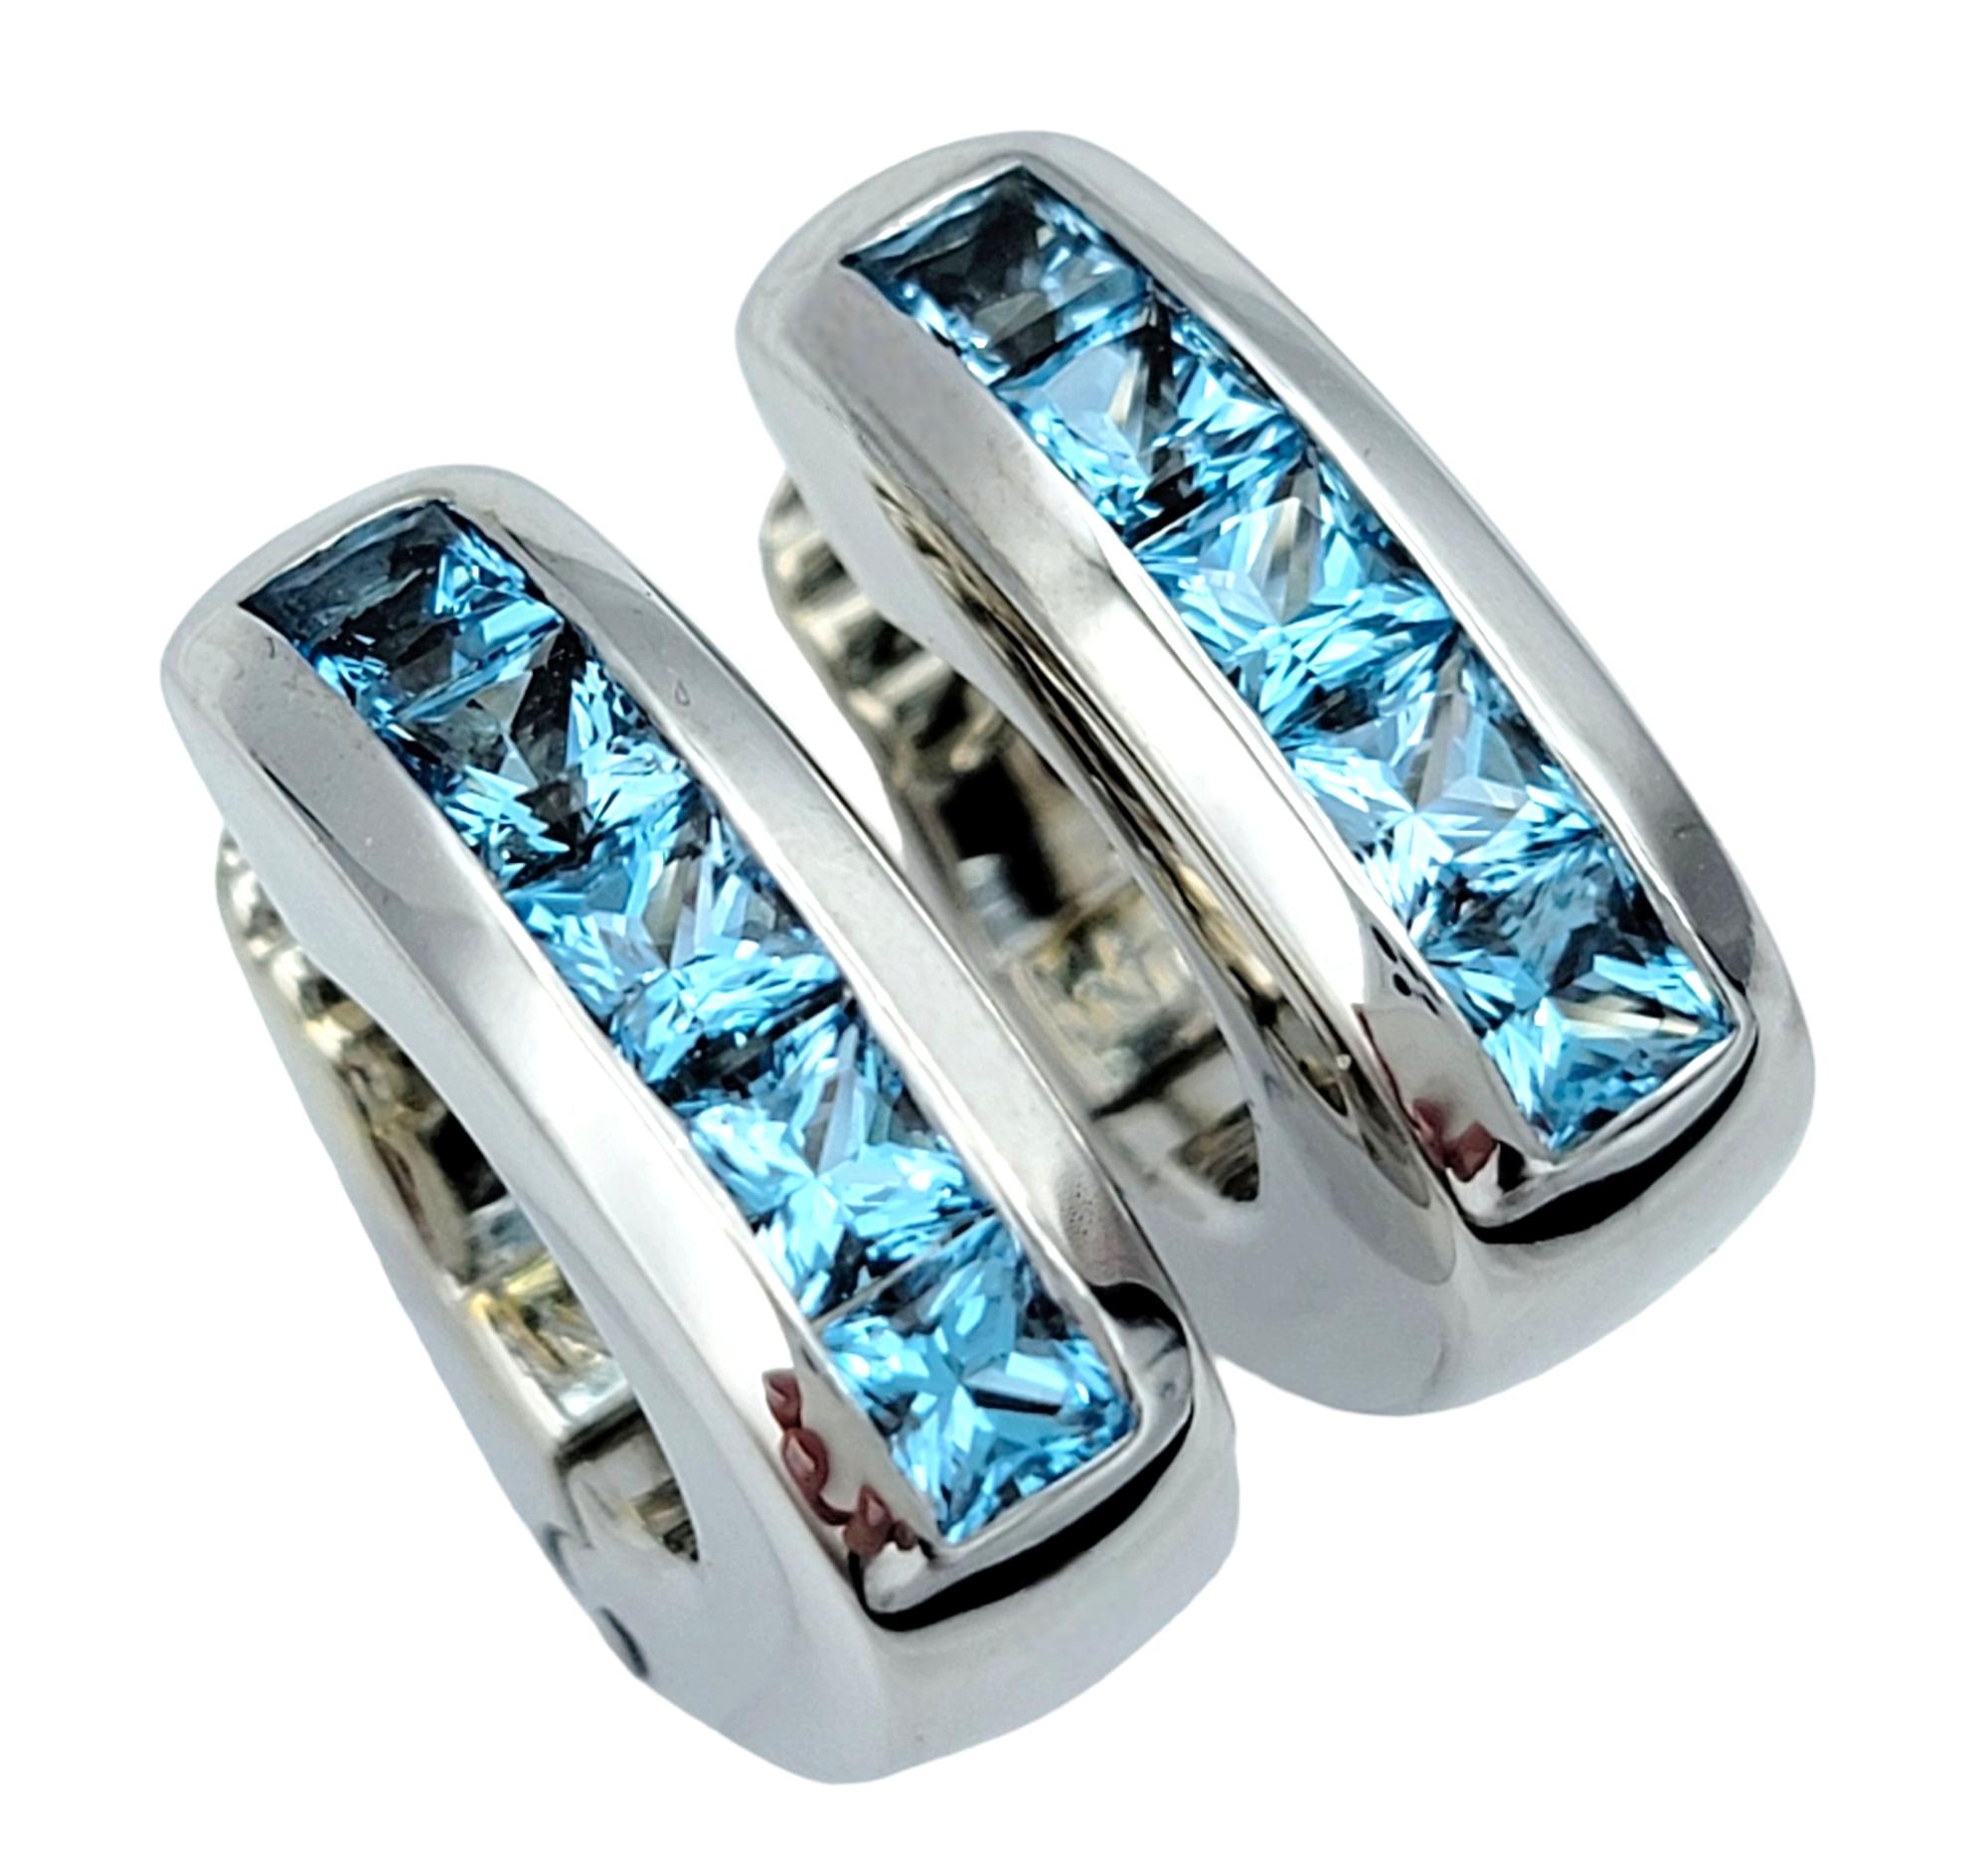 Crafted by Antonini, these stunning huggie hoop earrings feature a contemporary design that effortlessly blends elegance with modernity. Set in luxurious 18 karat white gold, the earrings showcase a channel-set arrangement of vibrant blue topaz